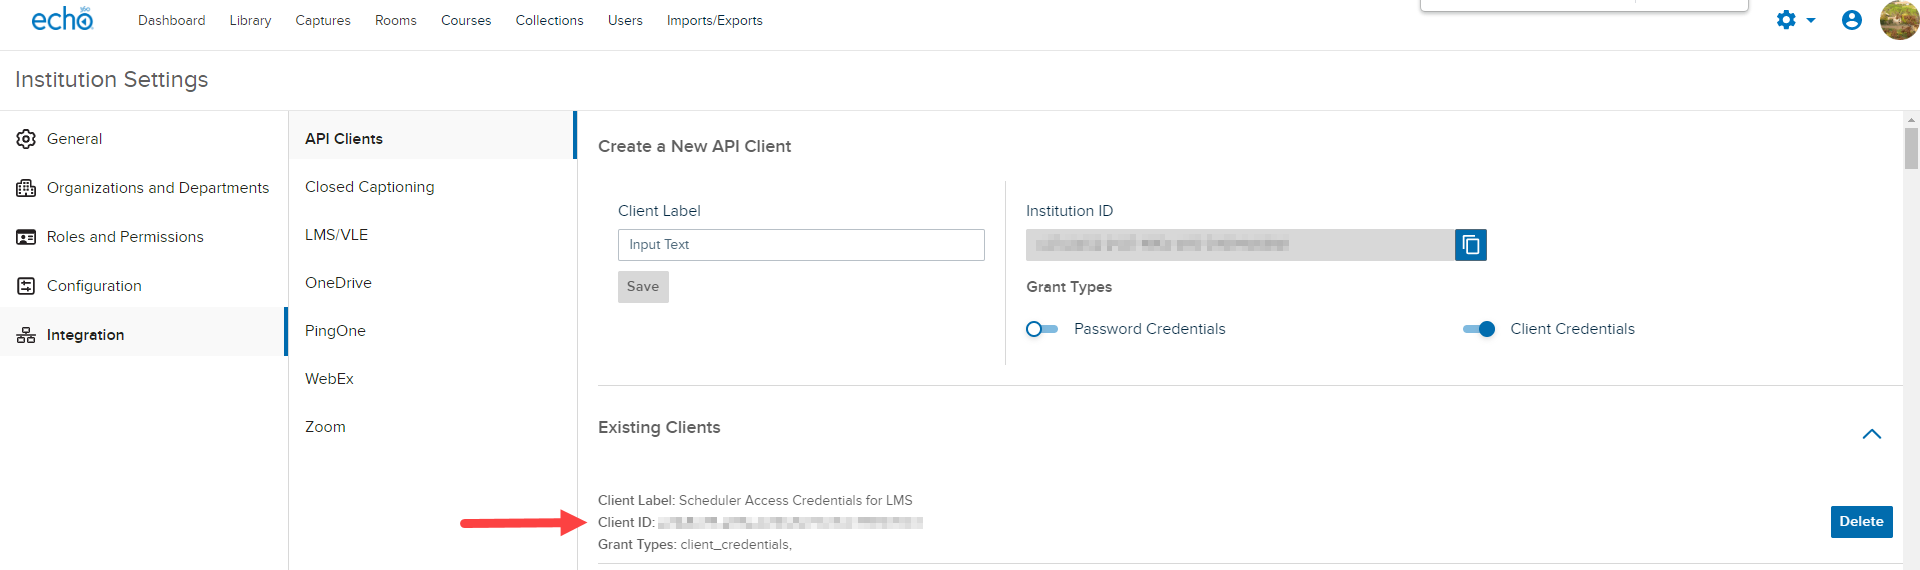 Completed API client configuration shows under Existing CLients